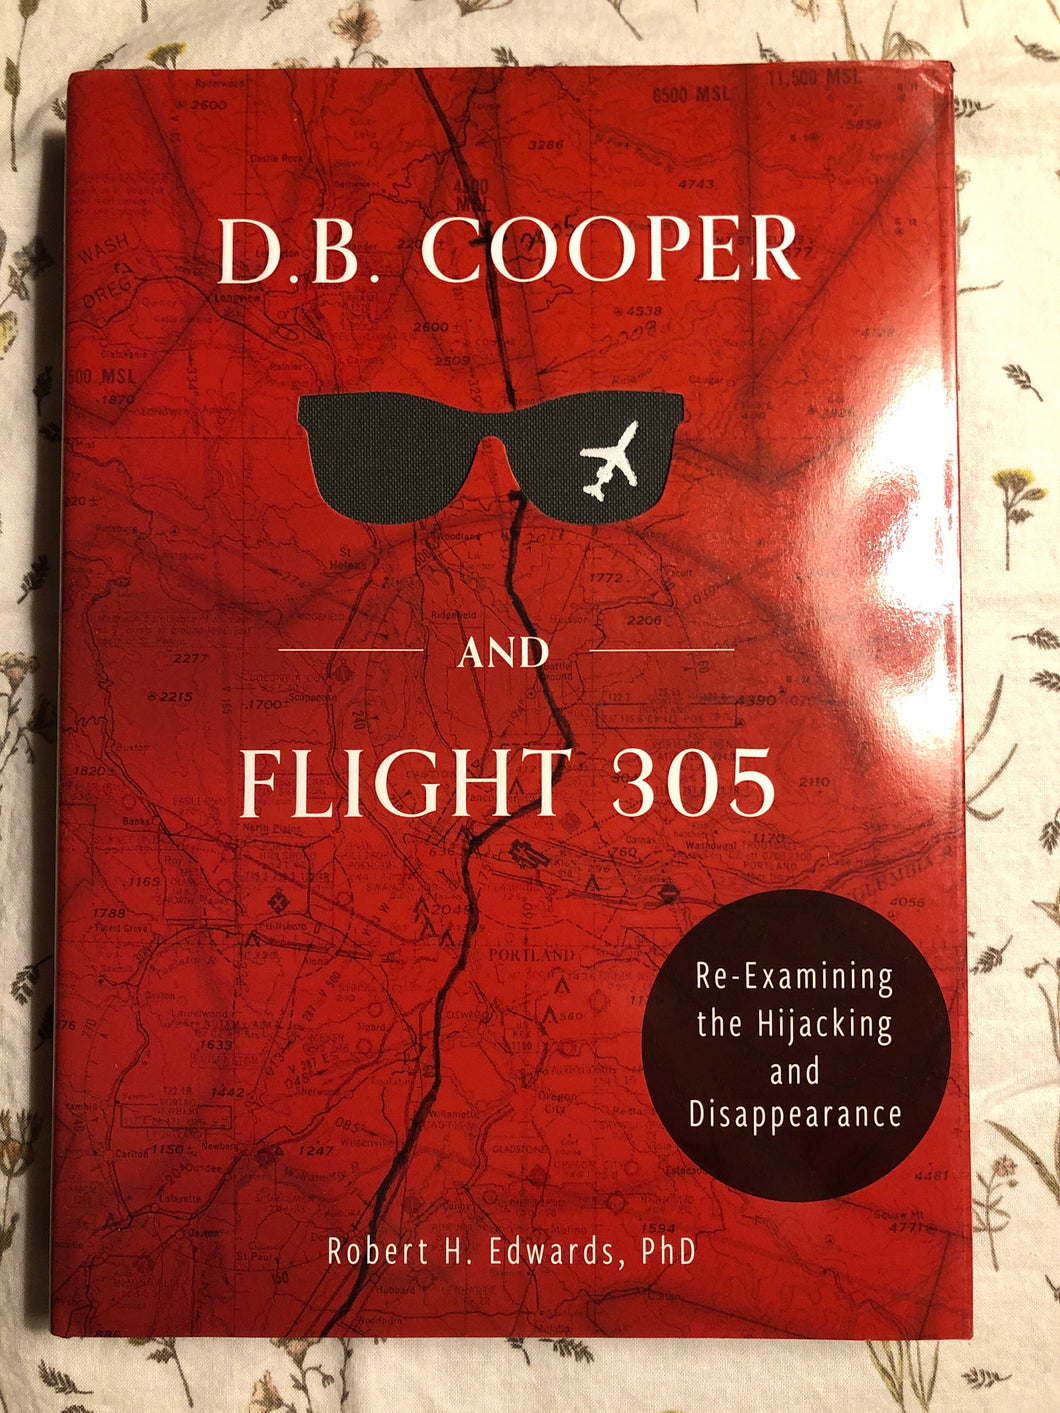 D.B. Cooper and Flight 305: Re-Examining the Hijacking and Disappearance